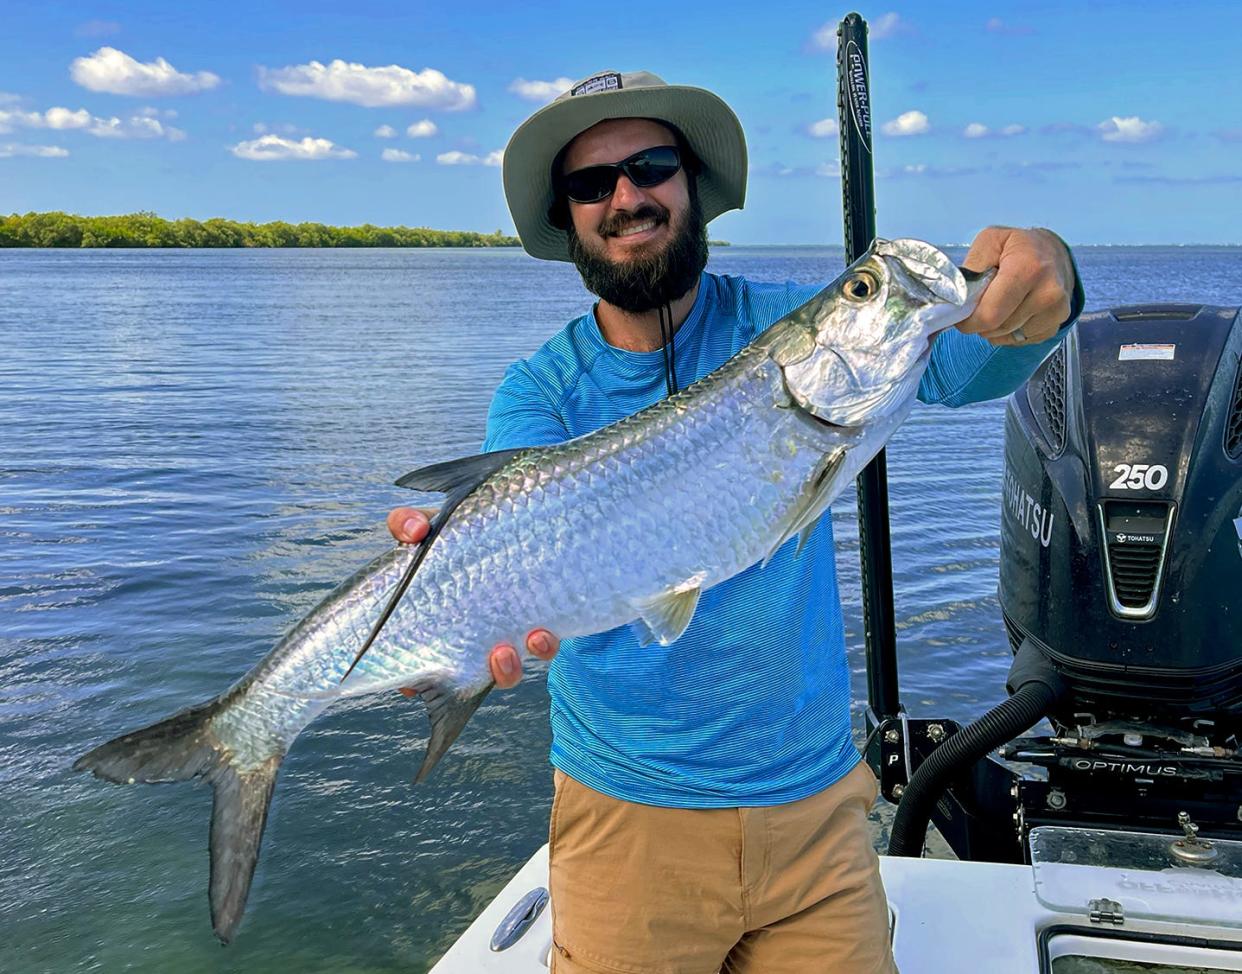 Andrew Bridges of Lakeland caught this juvenile tarpon on a live scaled sardine while fishing in Miguel Bay with Capt. John Gunter this week.